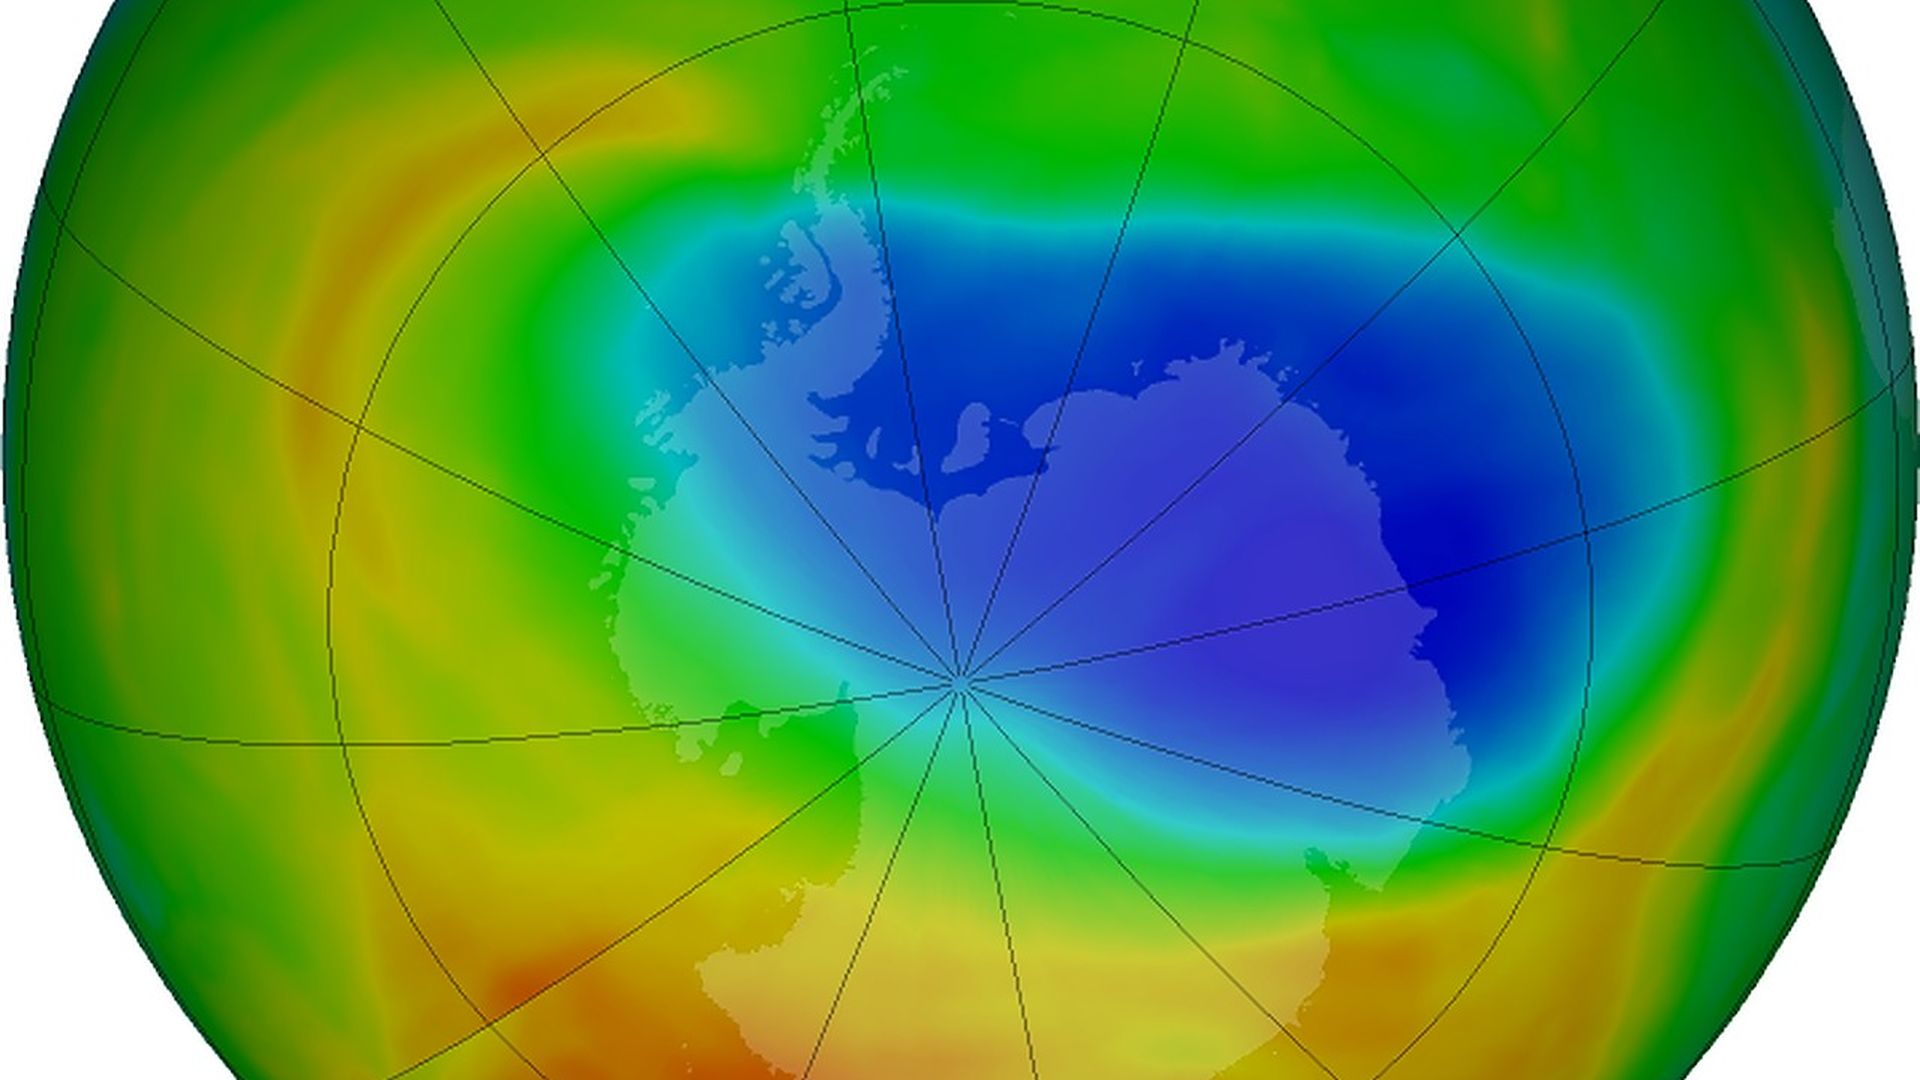 A NASA image of the hole in the ozone layer over Antarctica.